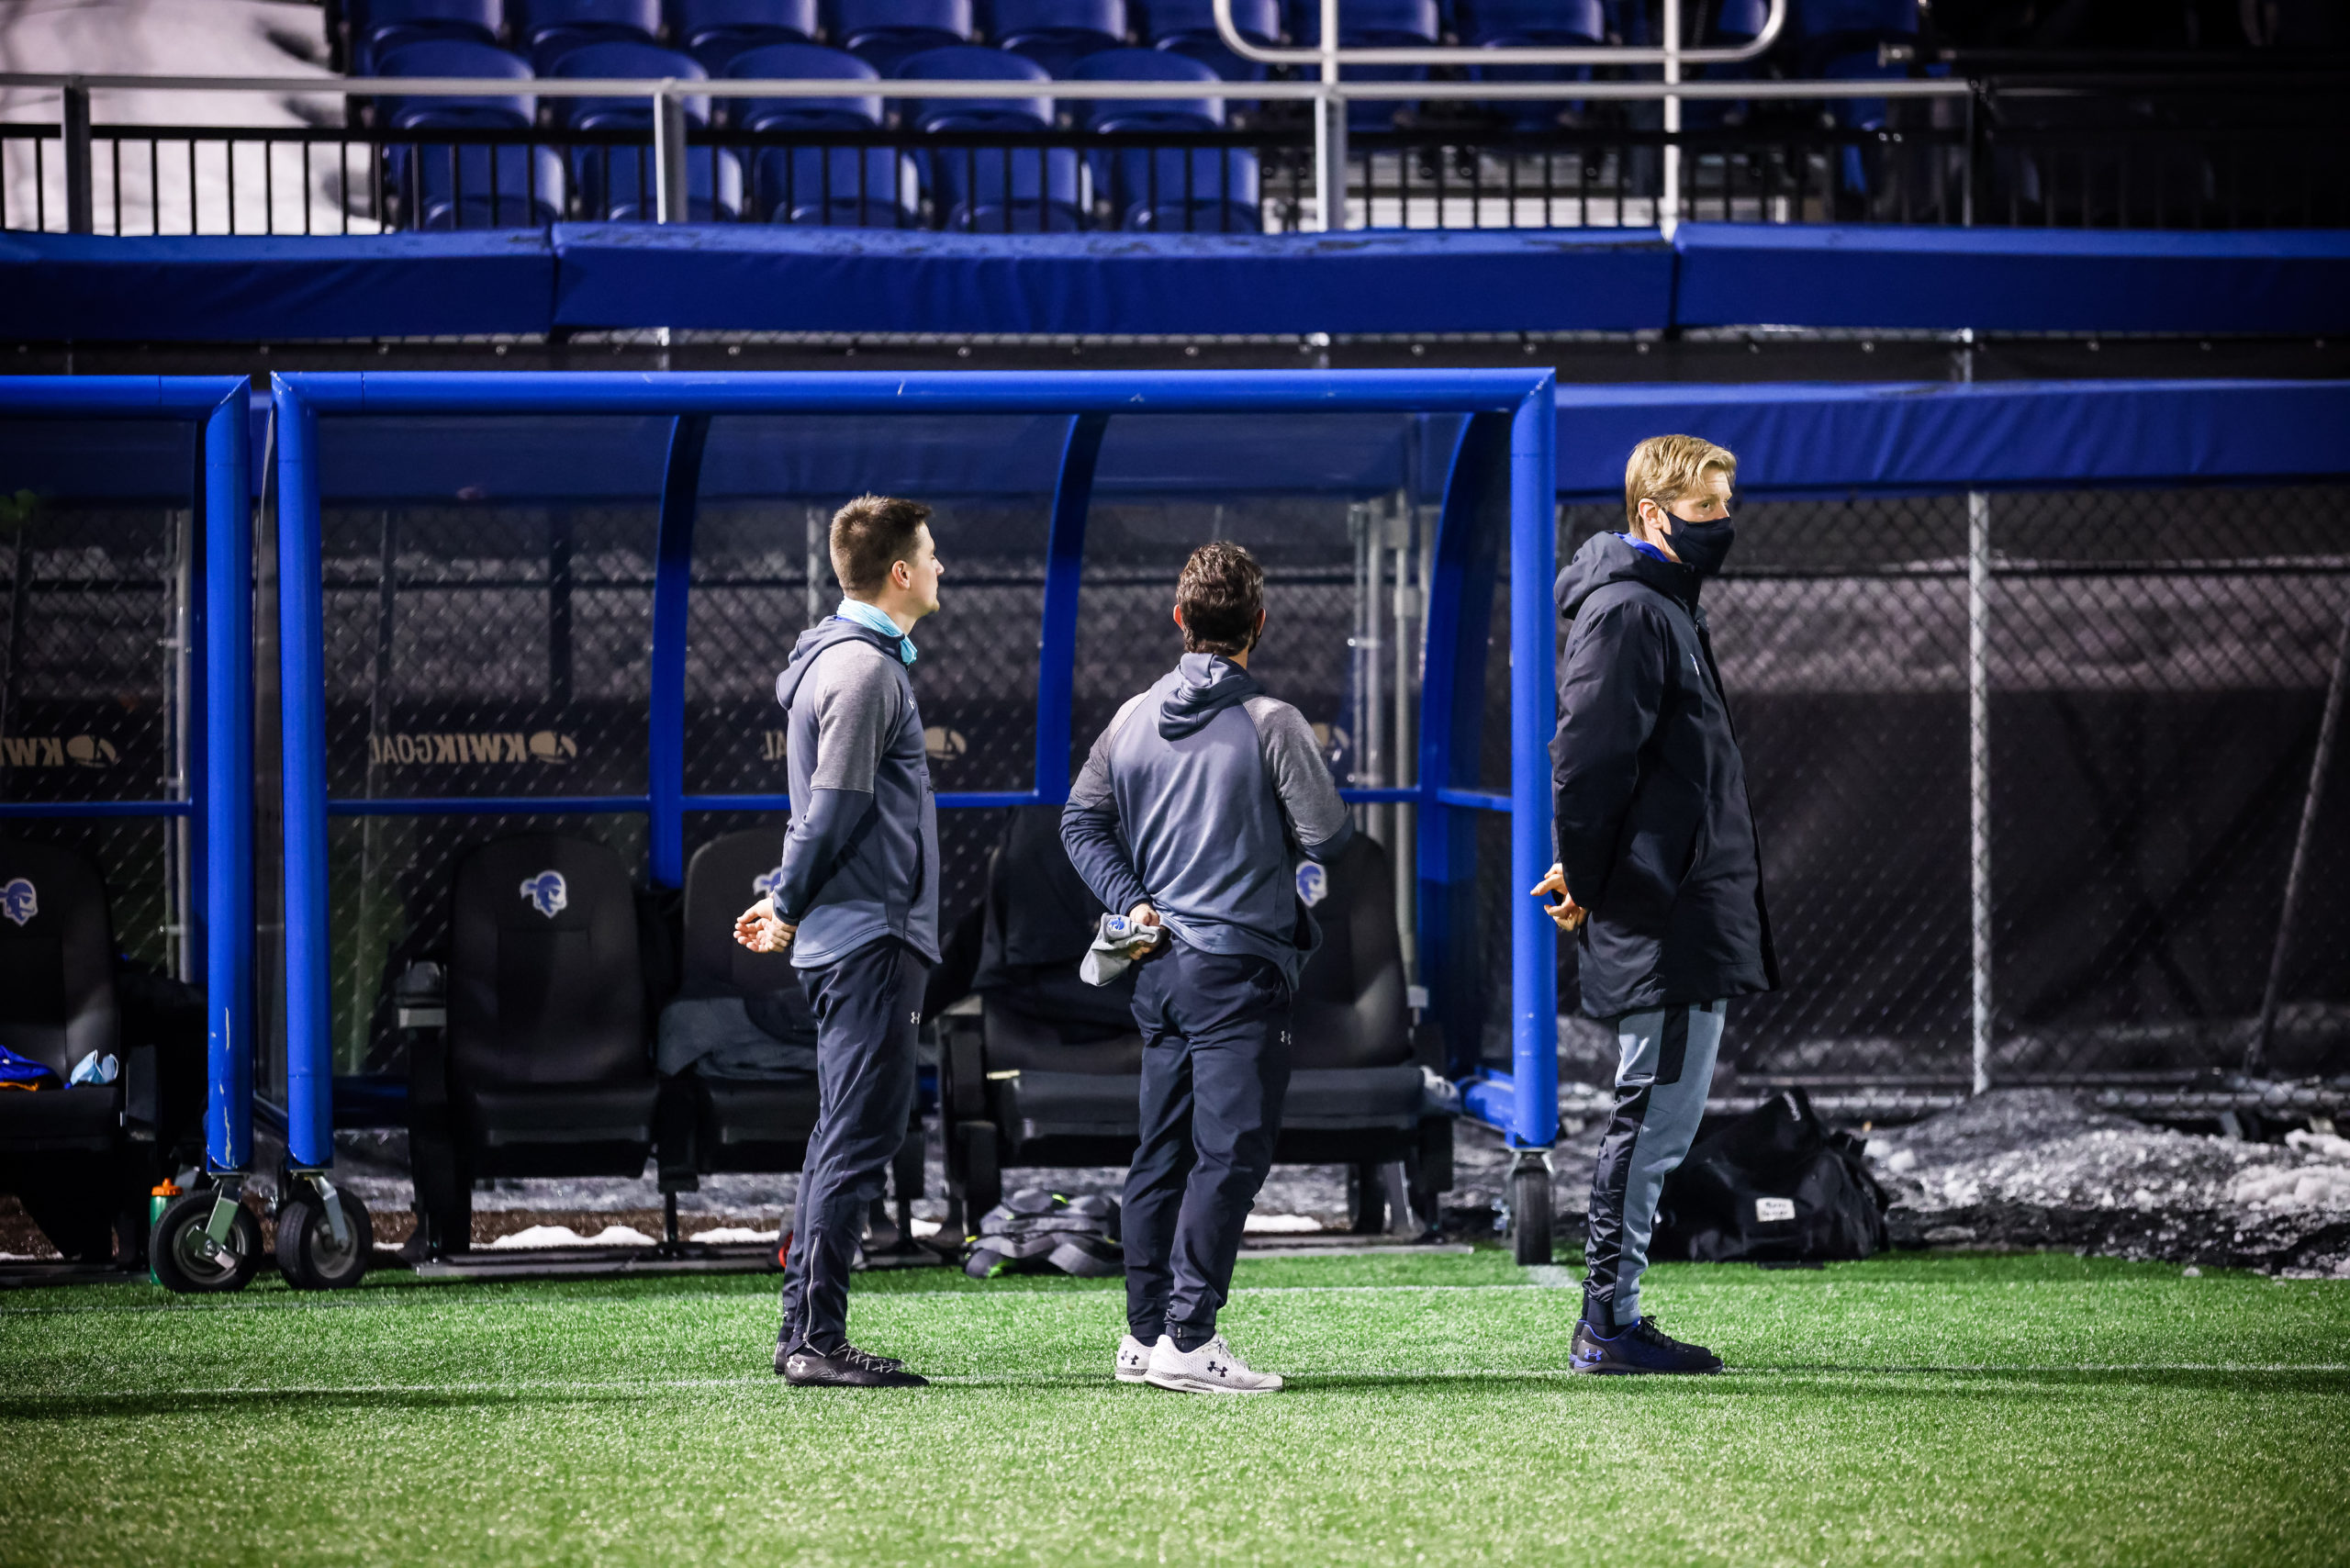 Andreas Lindberg and his coaching staff were named Coaching Staff of the Year for the Big East, and earned that distinction for the entire east region as well. They are also in the running for National Coaching Staff of the Year.